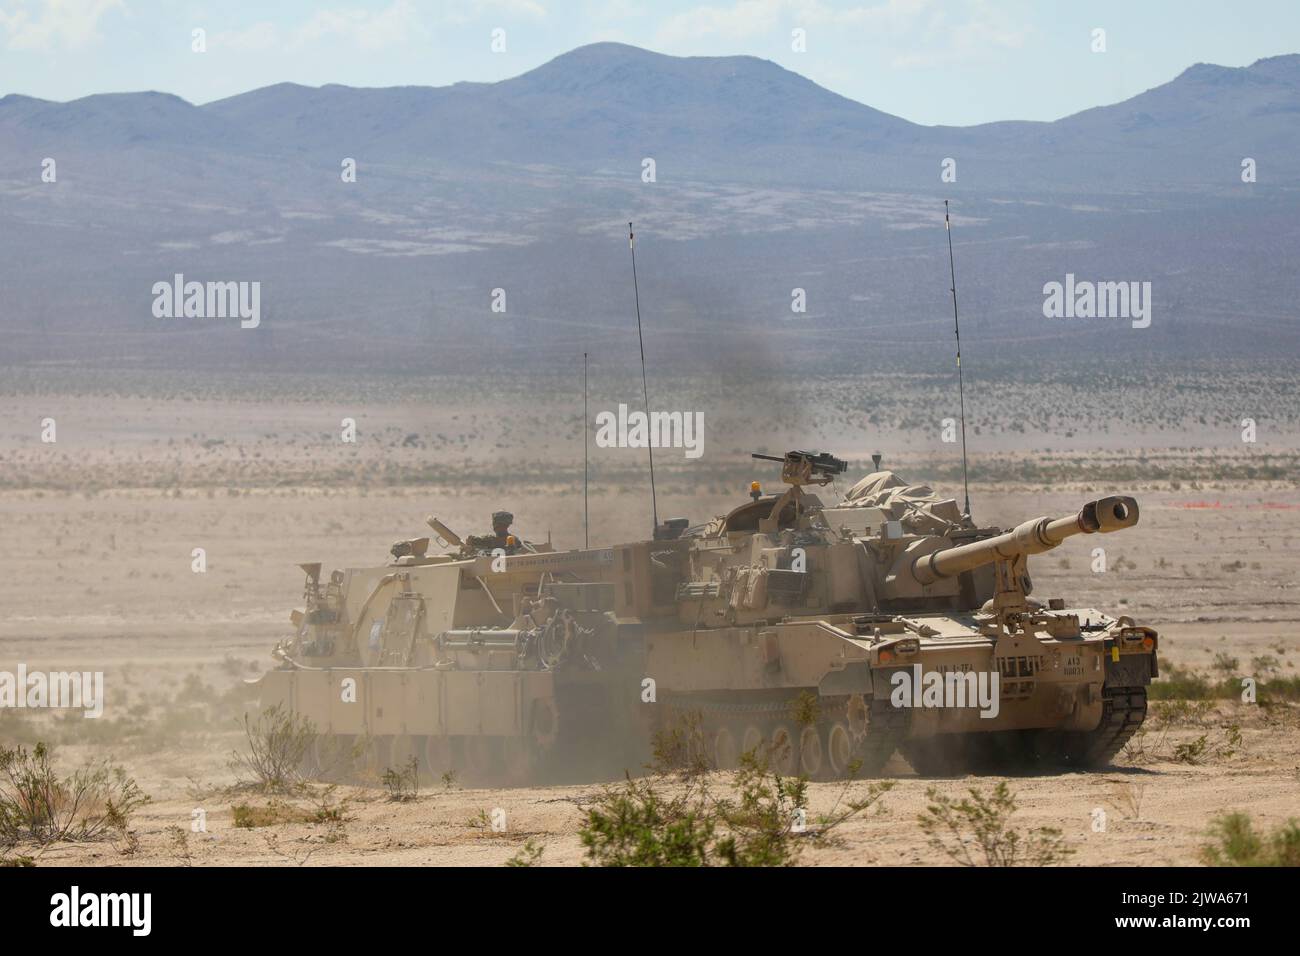 U.S. Soldiers assigned to 2nd Battalion, 70th Armored Regiment, 2nd Armored Brigade Combat Team, 1st Infantry Division transport a M109 Paladin using a M88 Hercules Recovery Vehicle during Decisive Action Rotation 22-09 at the National Training Center, Fort Irwin, Calif., Aug. 14, 2022 (U.S. Army photo by Sgt. Ryan Gosselin, Operations Group, National Training Center) Stock Photo